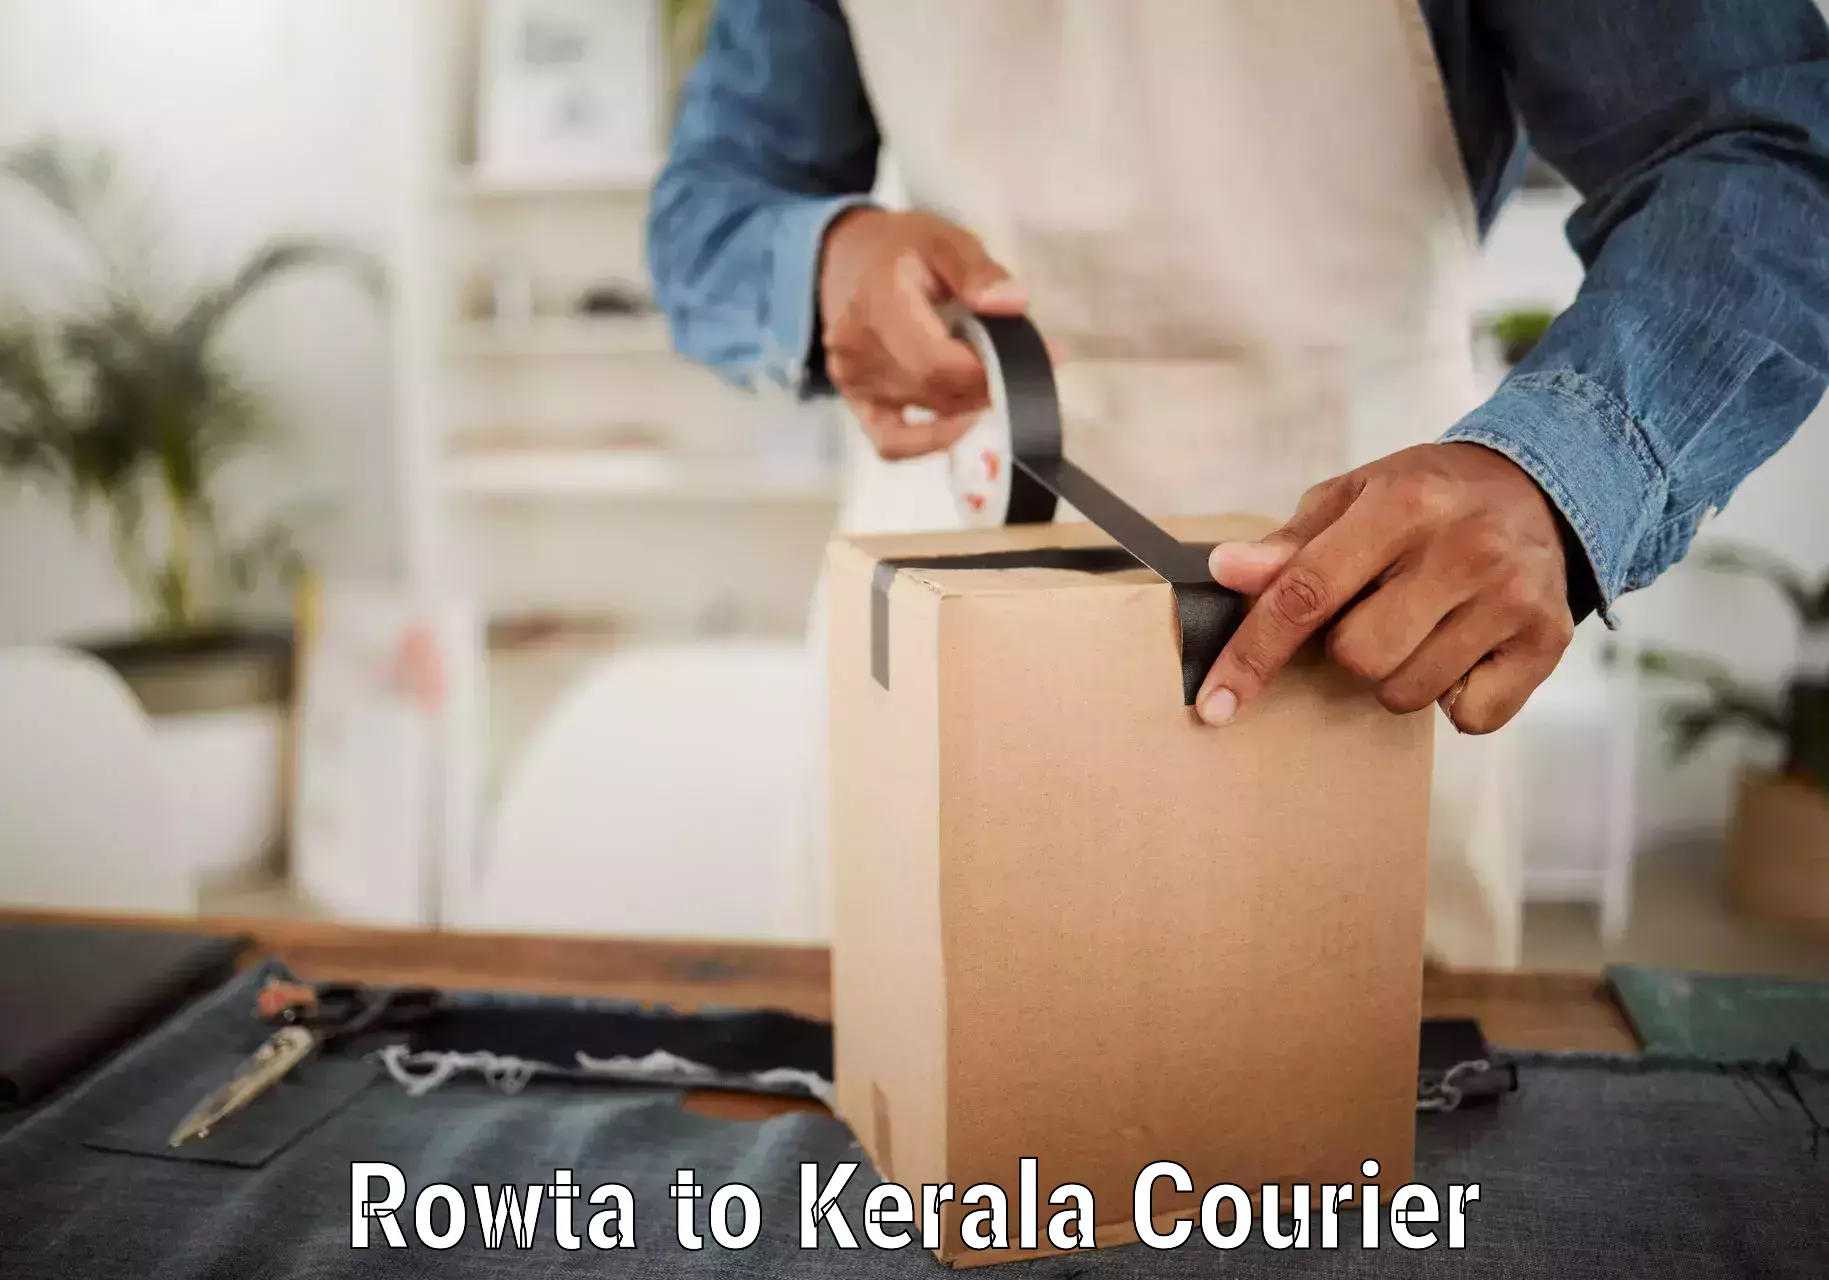 End-to-end delivery Rowta to Kerala